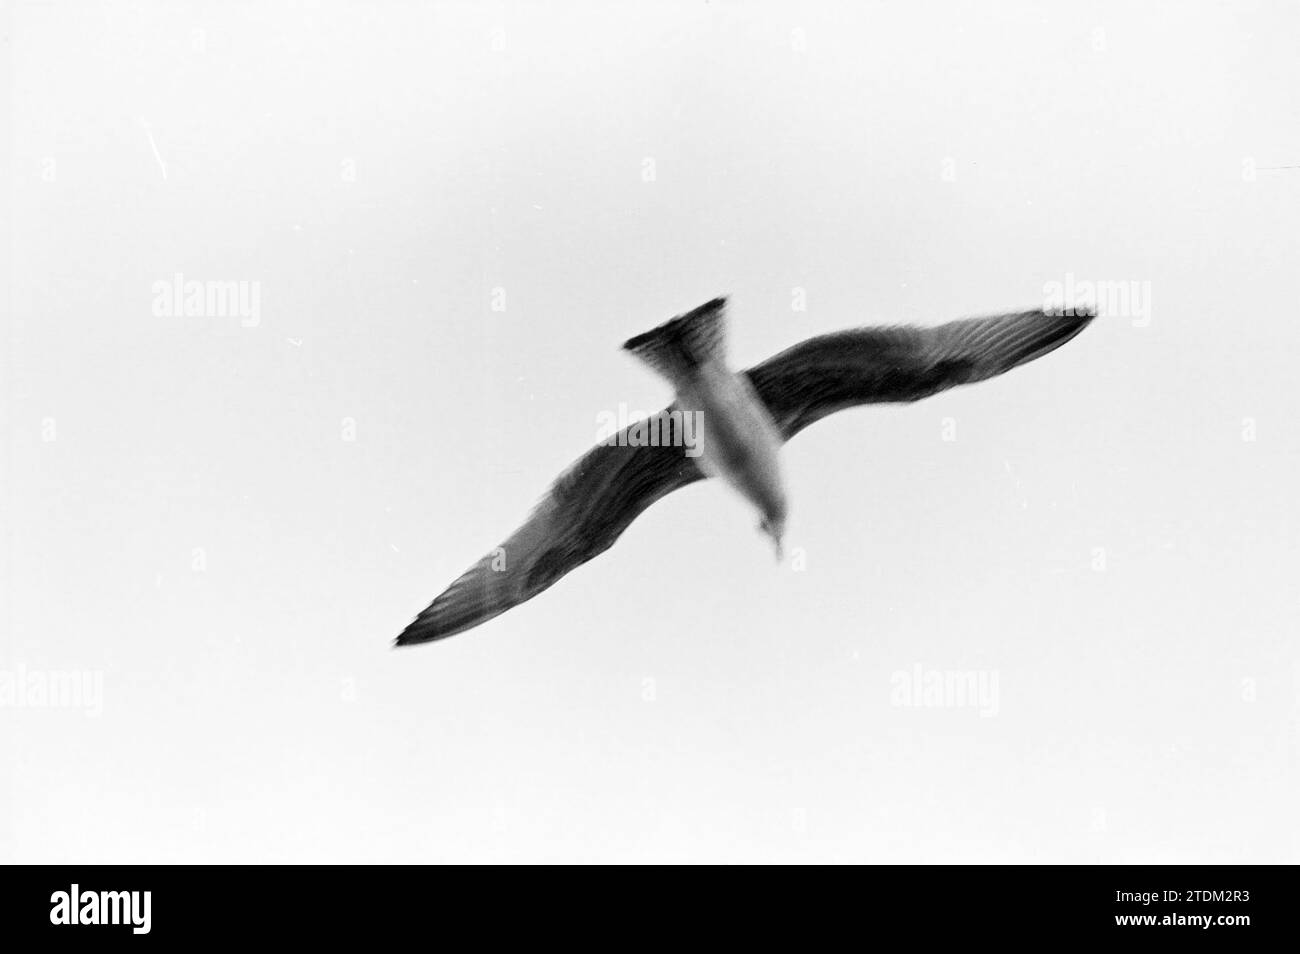 Seagull, Whizgle News from the Past, Tailored for the Future. Explore historical narratives, Dutch The Netherlands agency image with a modern perspective, bridging the gap between yesterday's events and tomorrow's insights. A timeless journey shaping the stories that shape our future Stock Photo